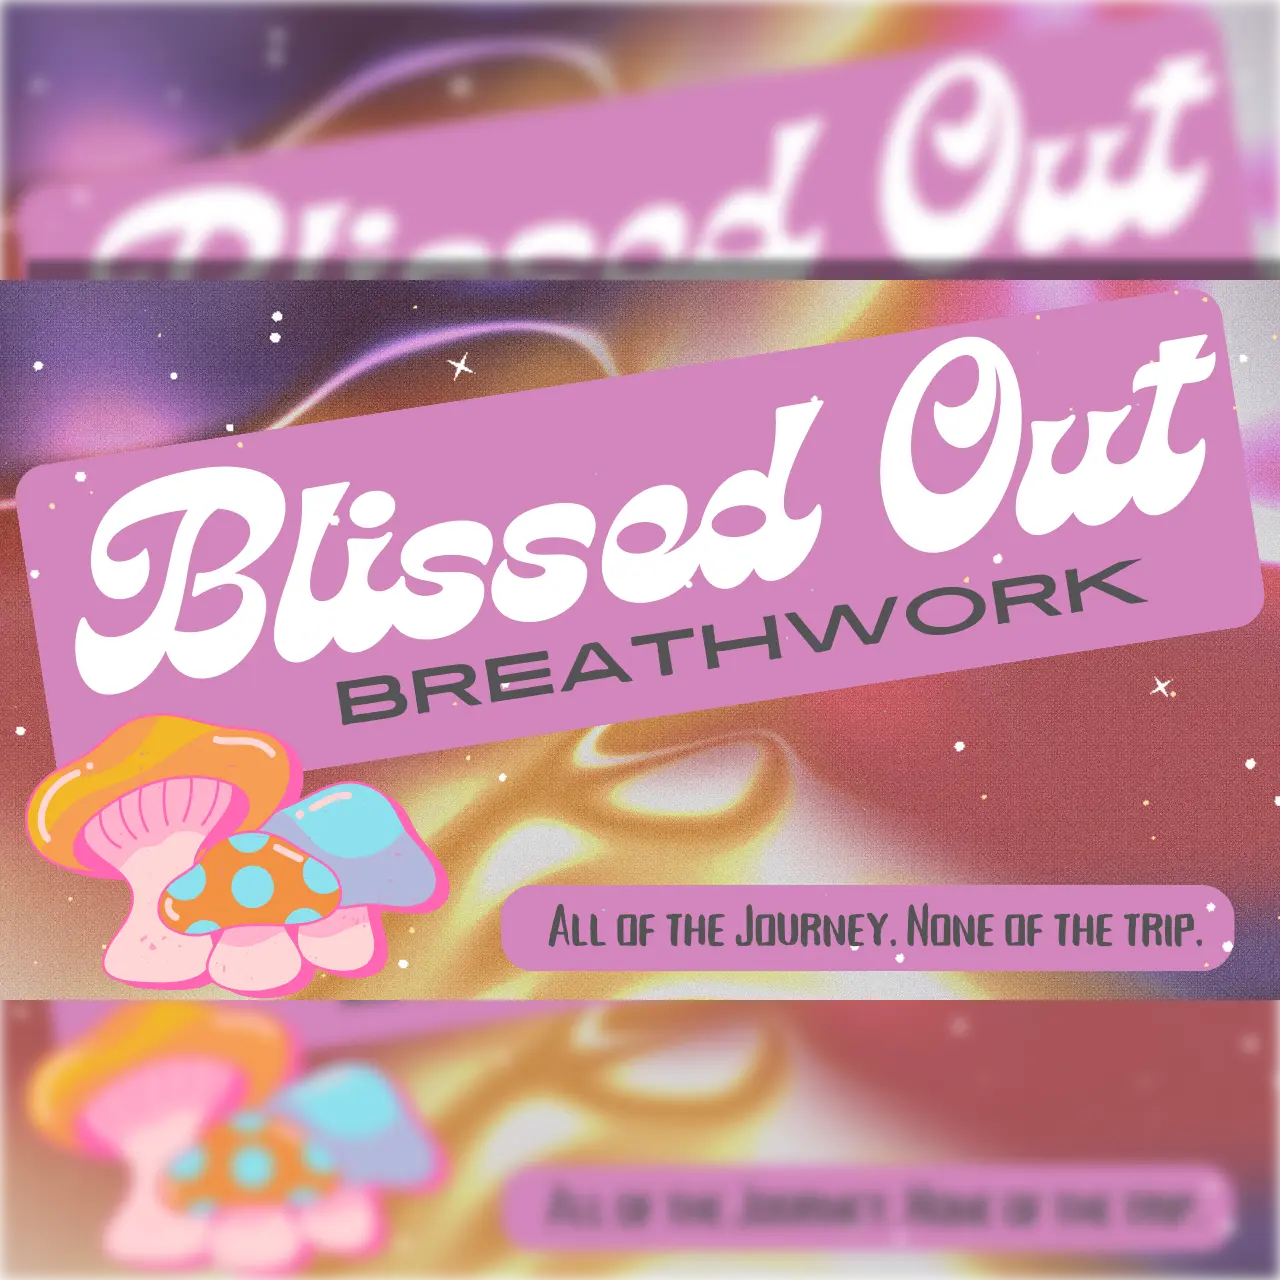 Blissed Out Breathwork